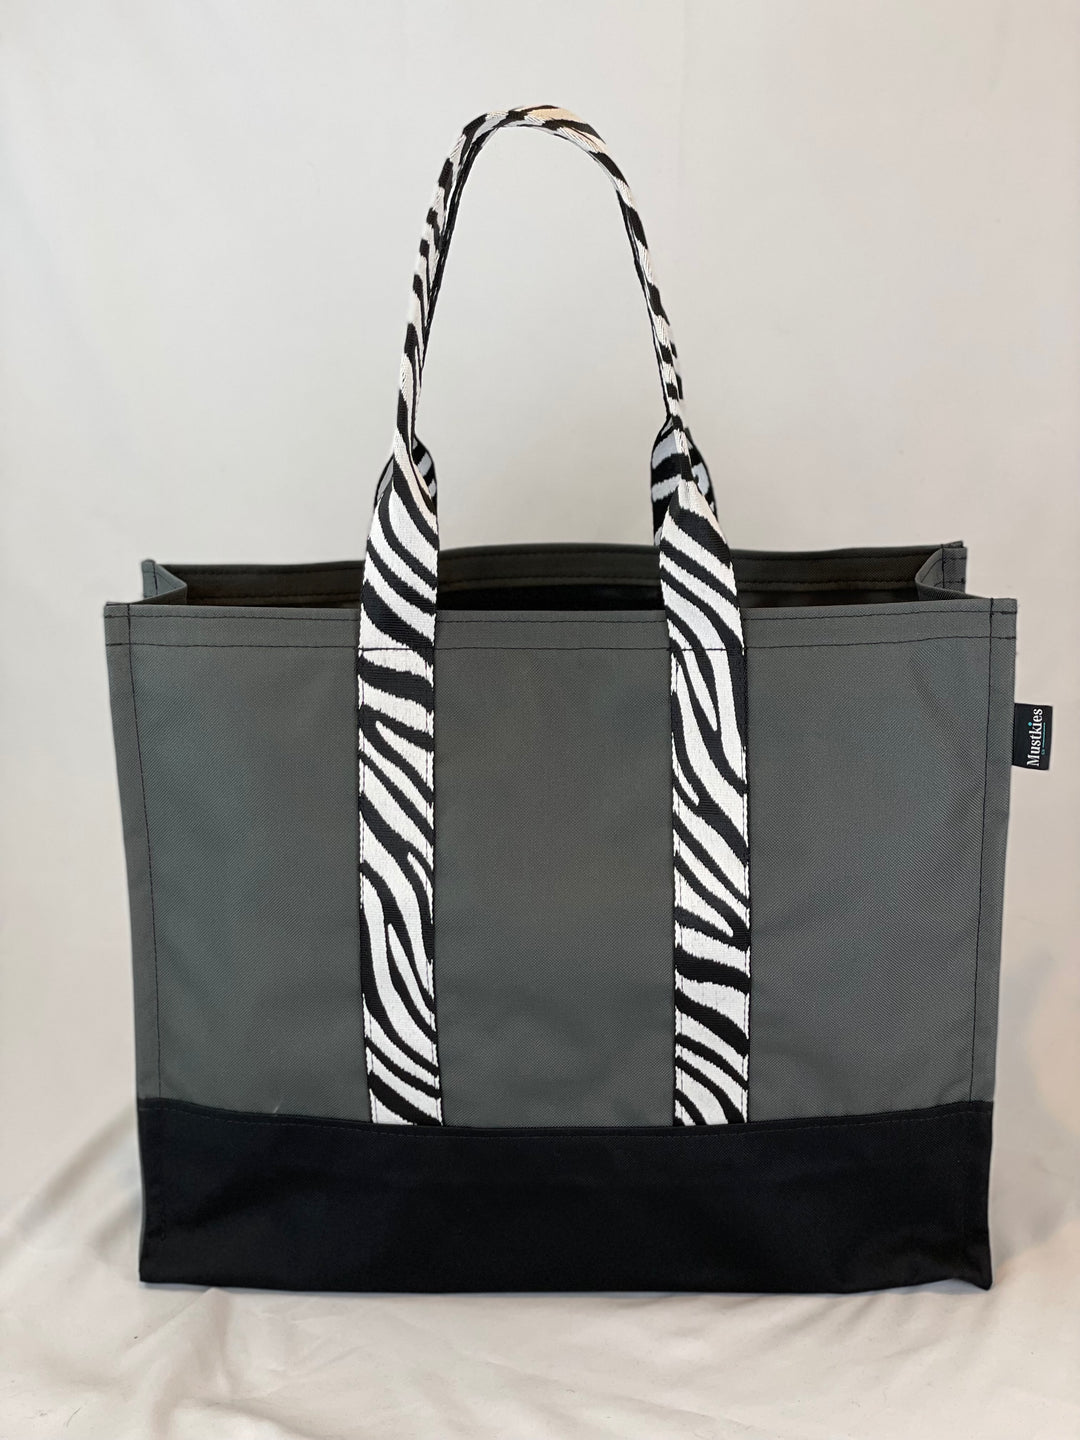 Mustkies CARRIE Tote is your go-to tote. Crafted in a Gray waterproof canvas with black lining and Zebra pattern straps. It is a versatile, lightweight everyday bag. Another must-have for running errands, schlepping gear to the kids games, for the beach or even carrying groceries home from the market. White Plains, NY. Westchester County